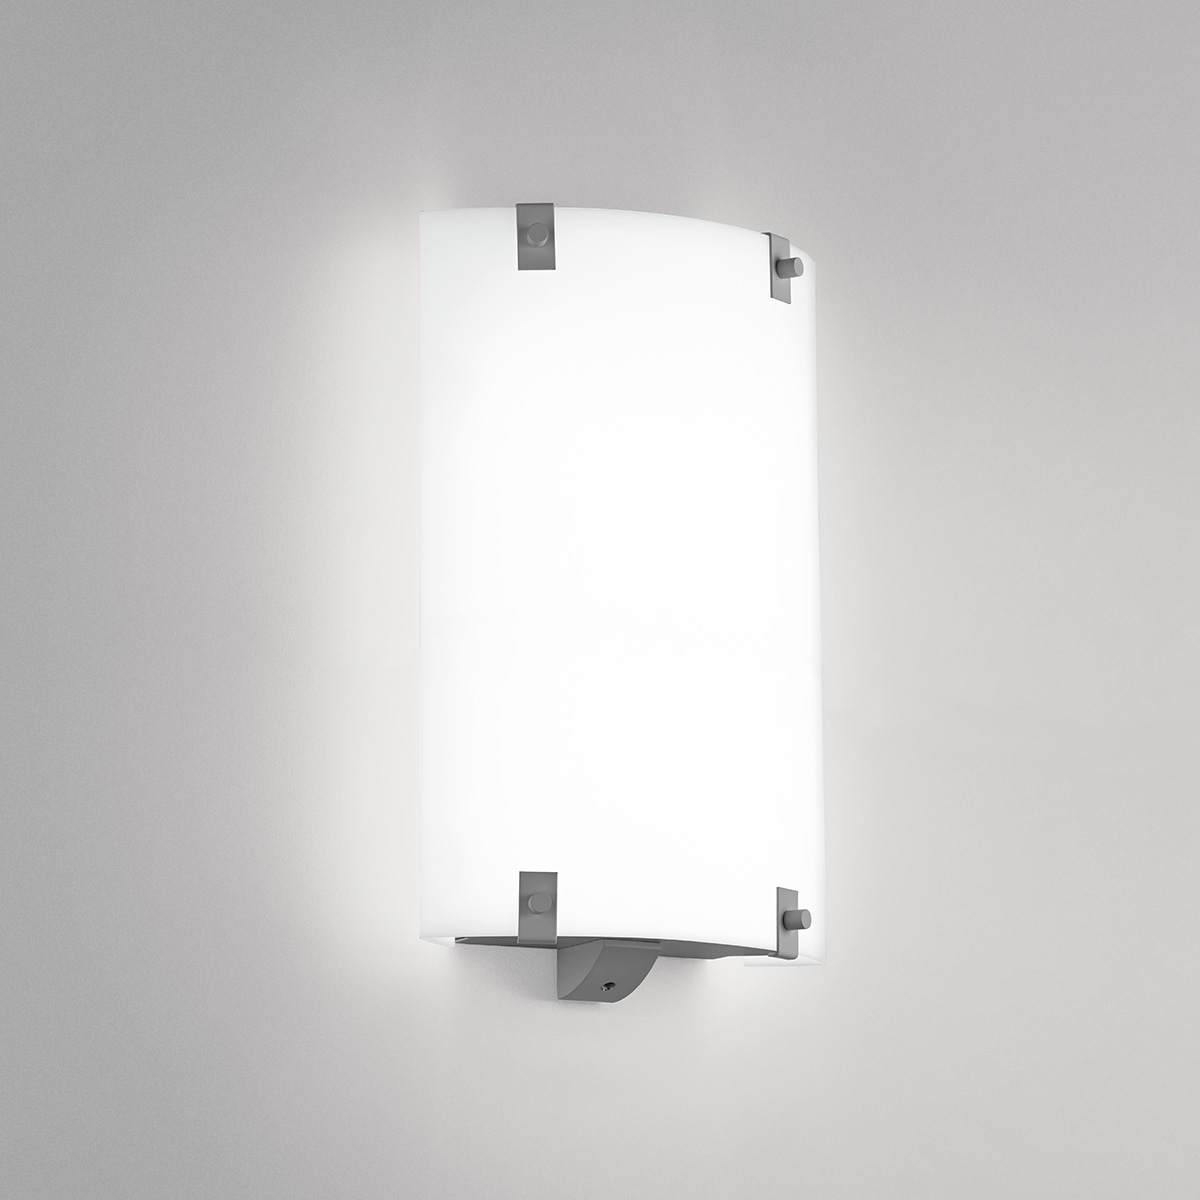 A small, rectangular wall sconce with button accents